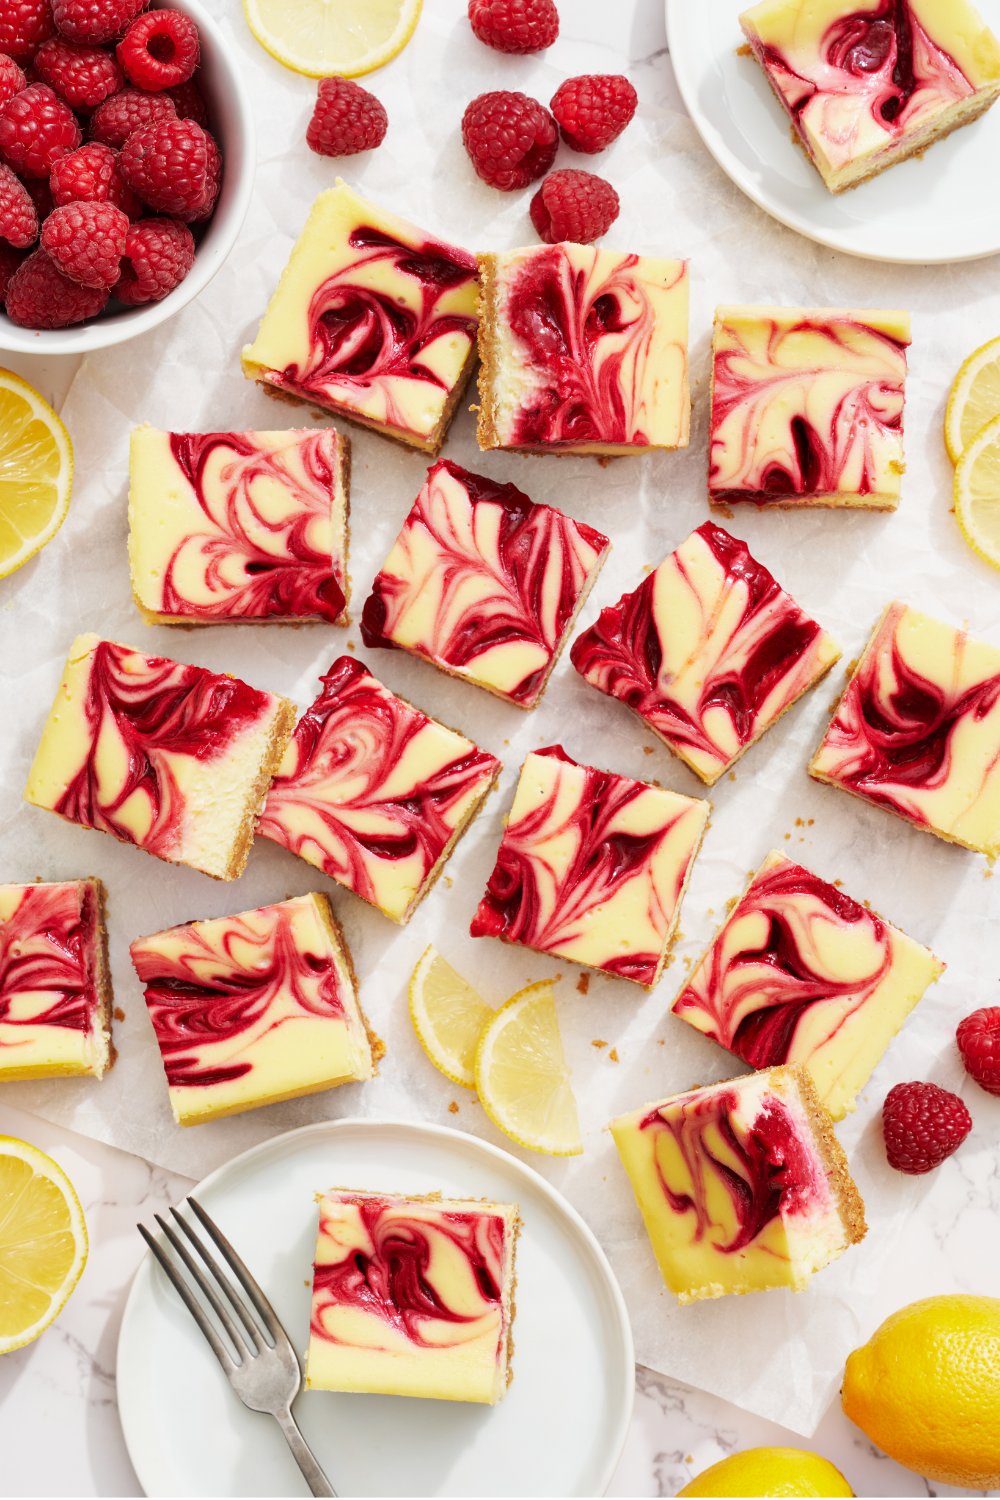 the whole pan of raspberry cheesecake bars on a white countertop, with fresh lemons nearby and a bowl of fresh raspberries.